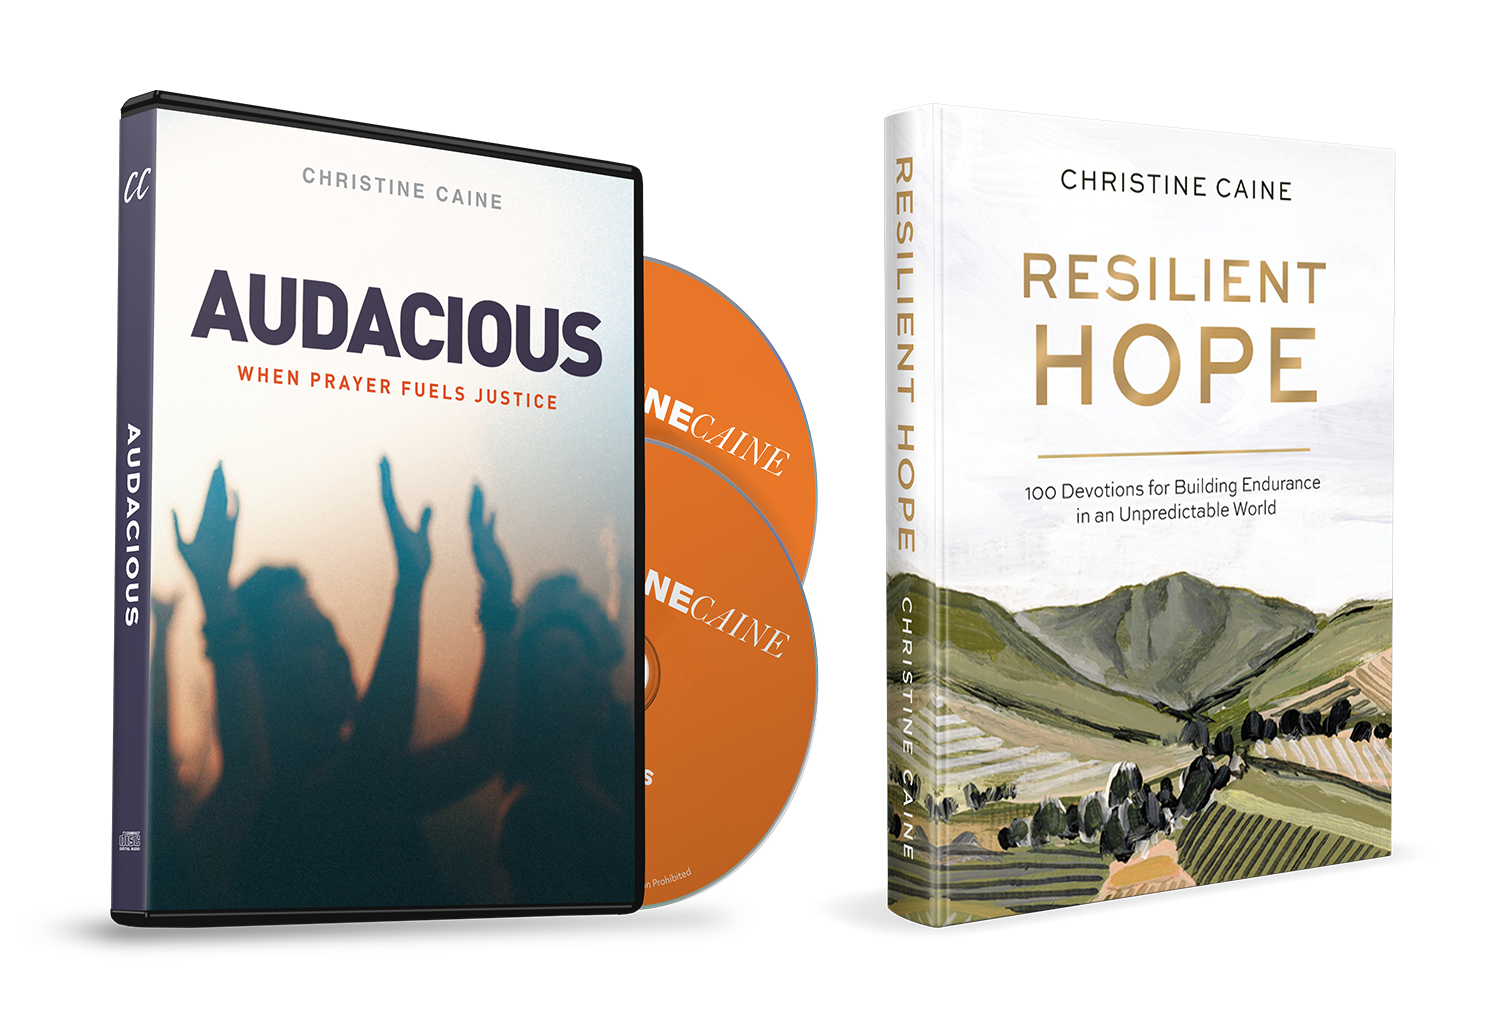 Audacious and Resilient Hope by Christine Caine by TBN